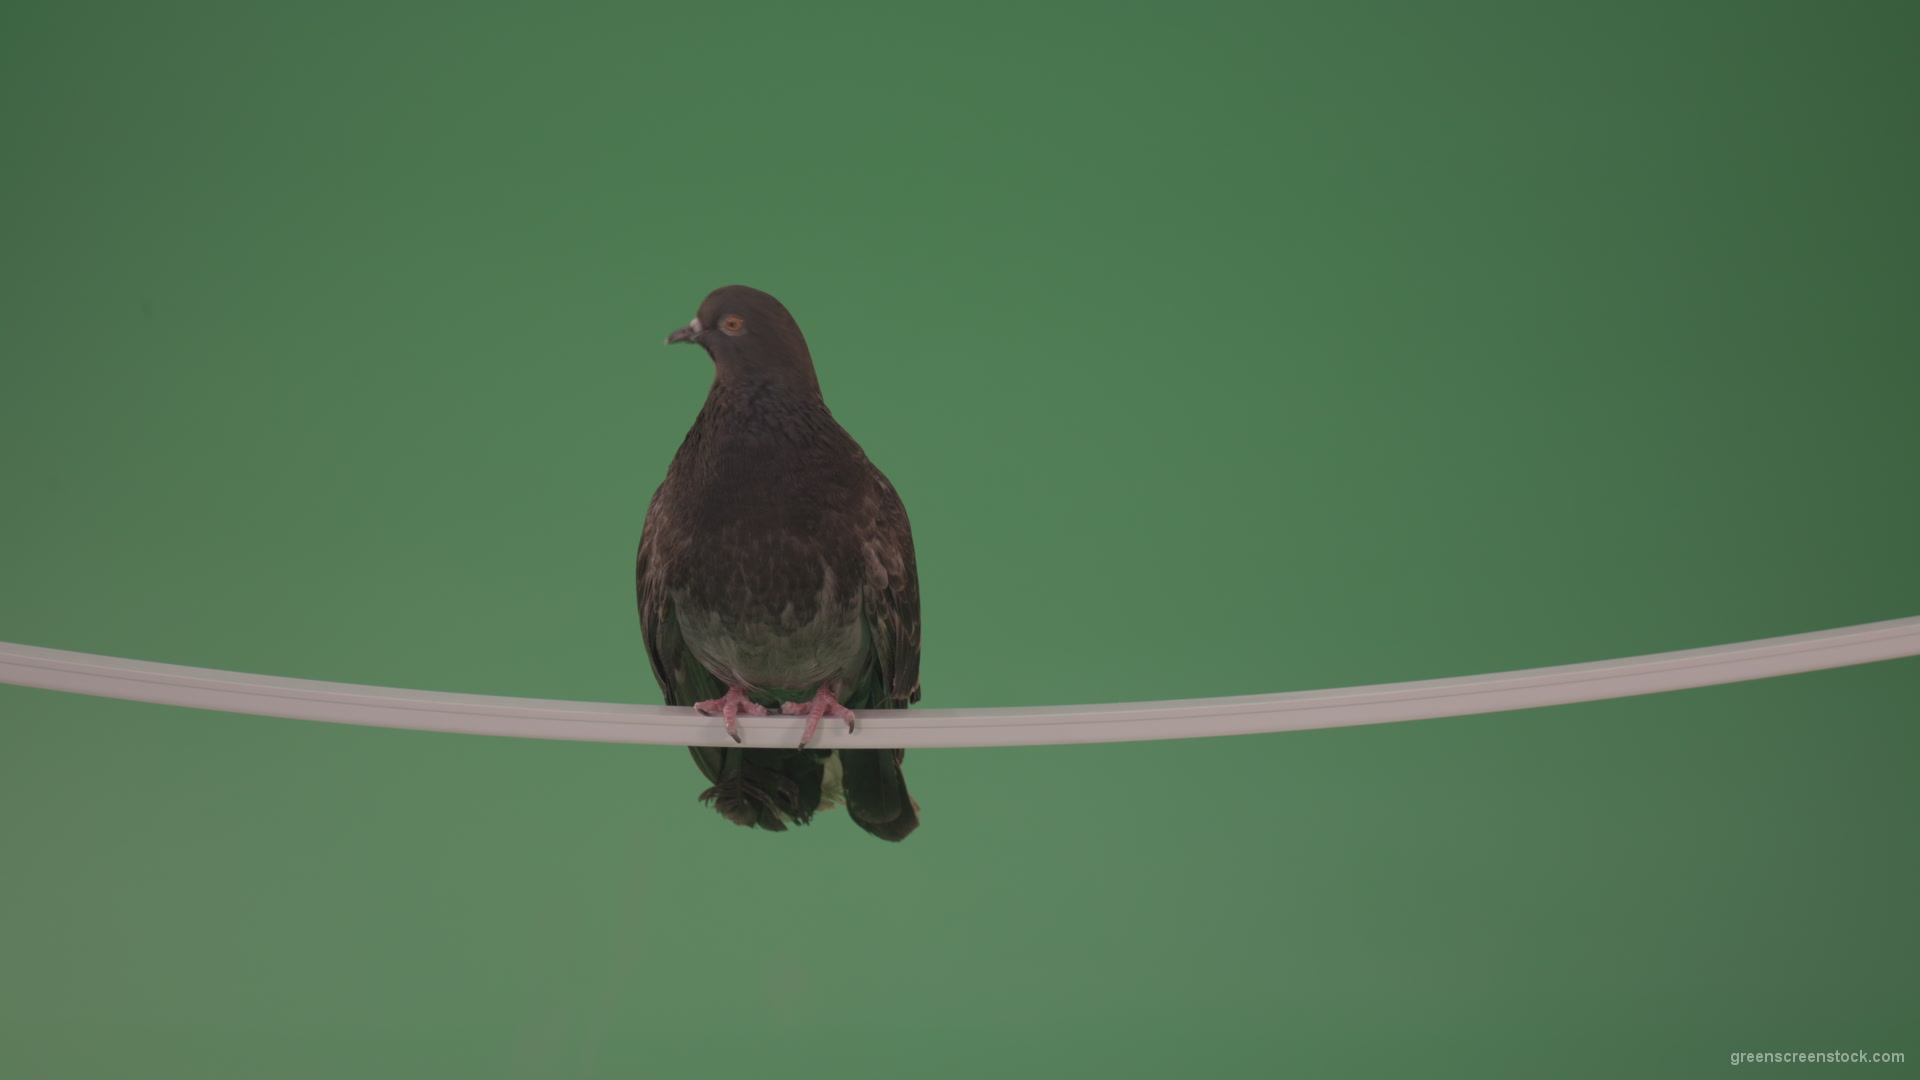 Beautiful-bird-of-doves-flew-to-explore-the-terrain-isolated-on-chromakey-background_007 Green Screen Stock